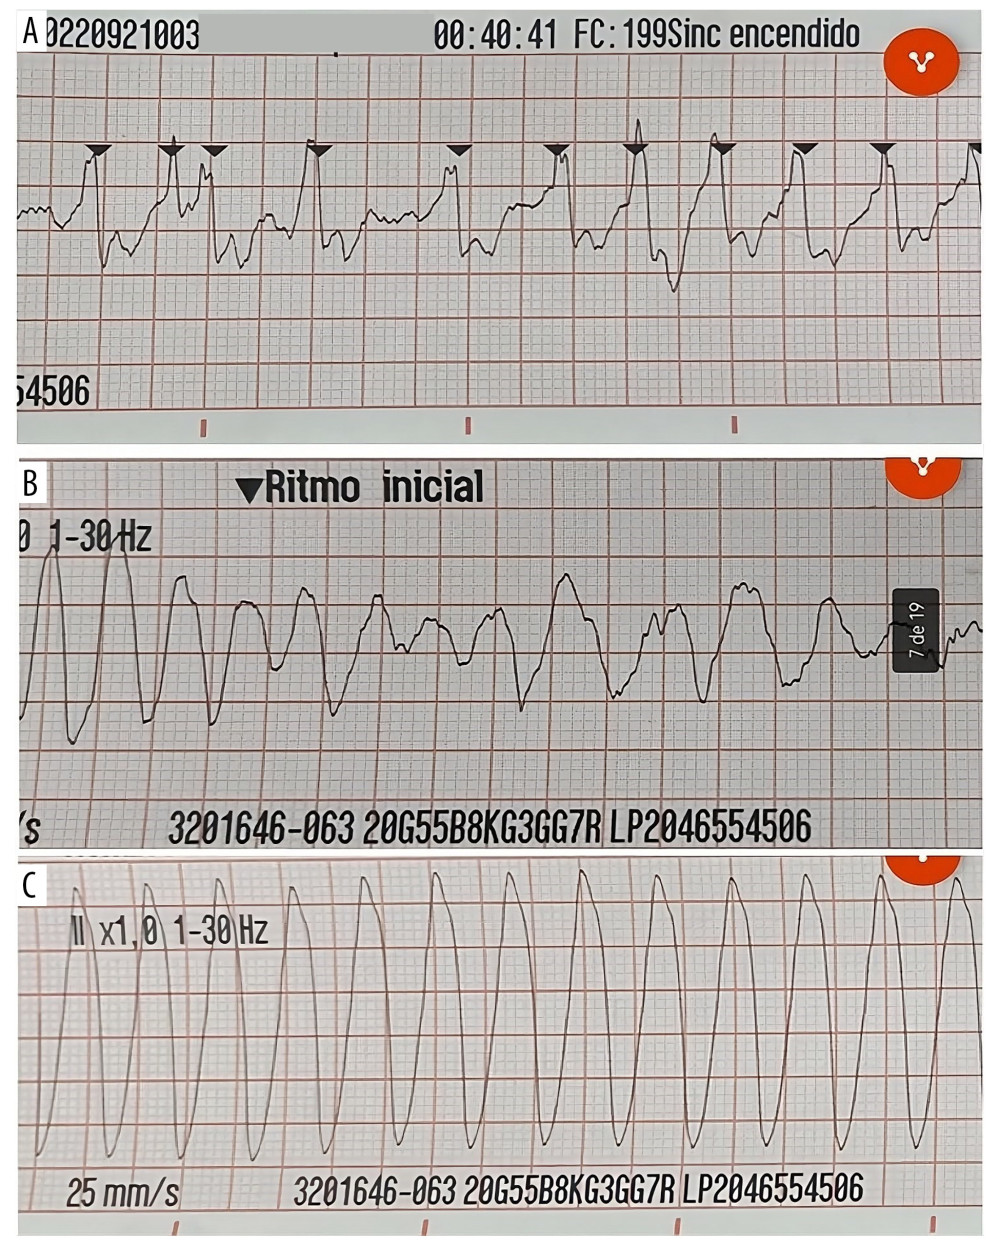 Electrocardiograms recorded during attention that show initial atrial fibrillation with rapid ventricular response and right bundle branch block (A), subsequent ventricular fibrillation rhythm (B) and, finally, sustained ventricular tachycardia (C).